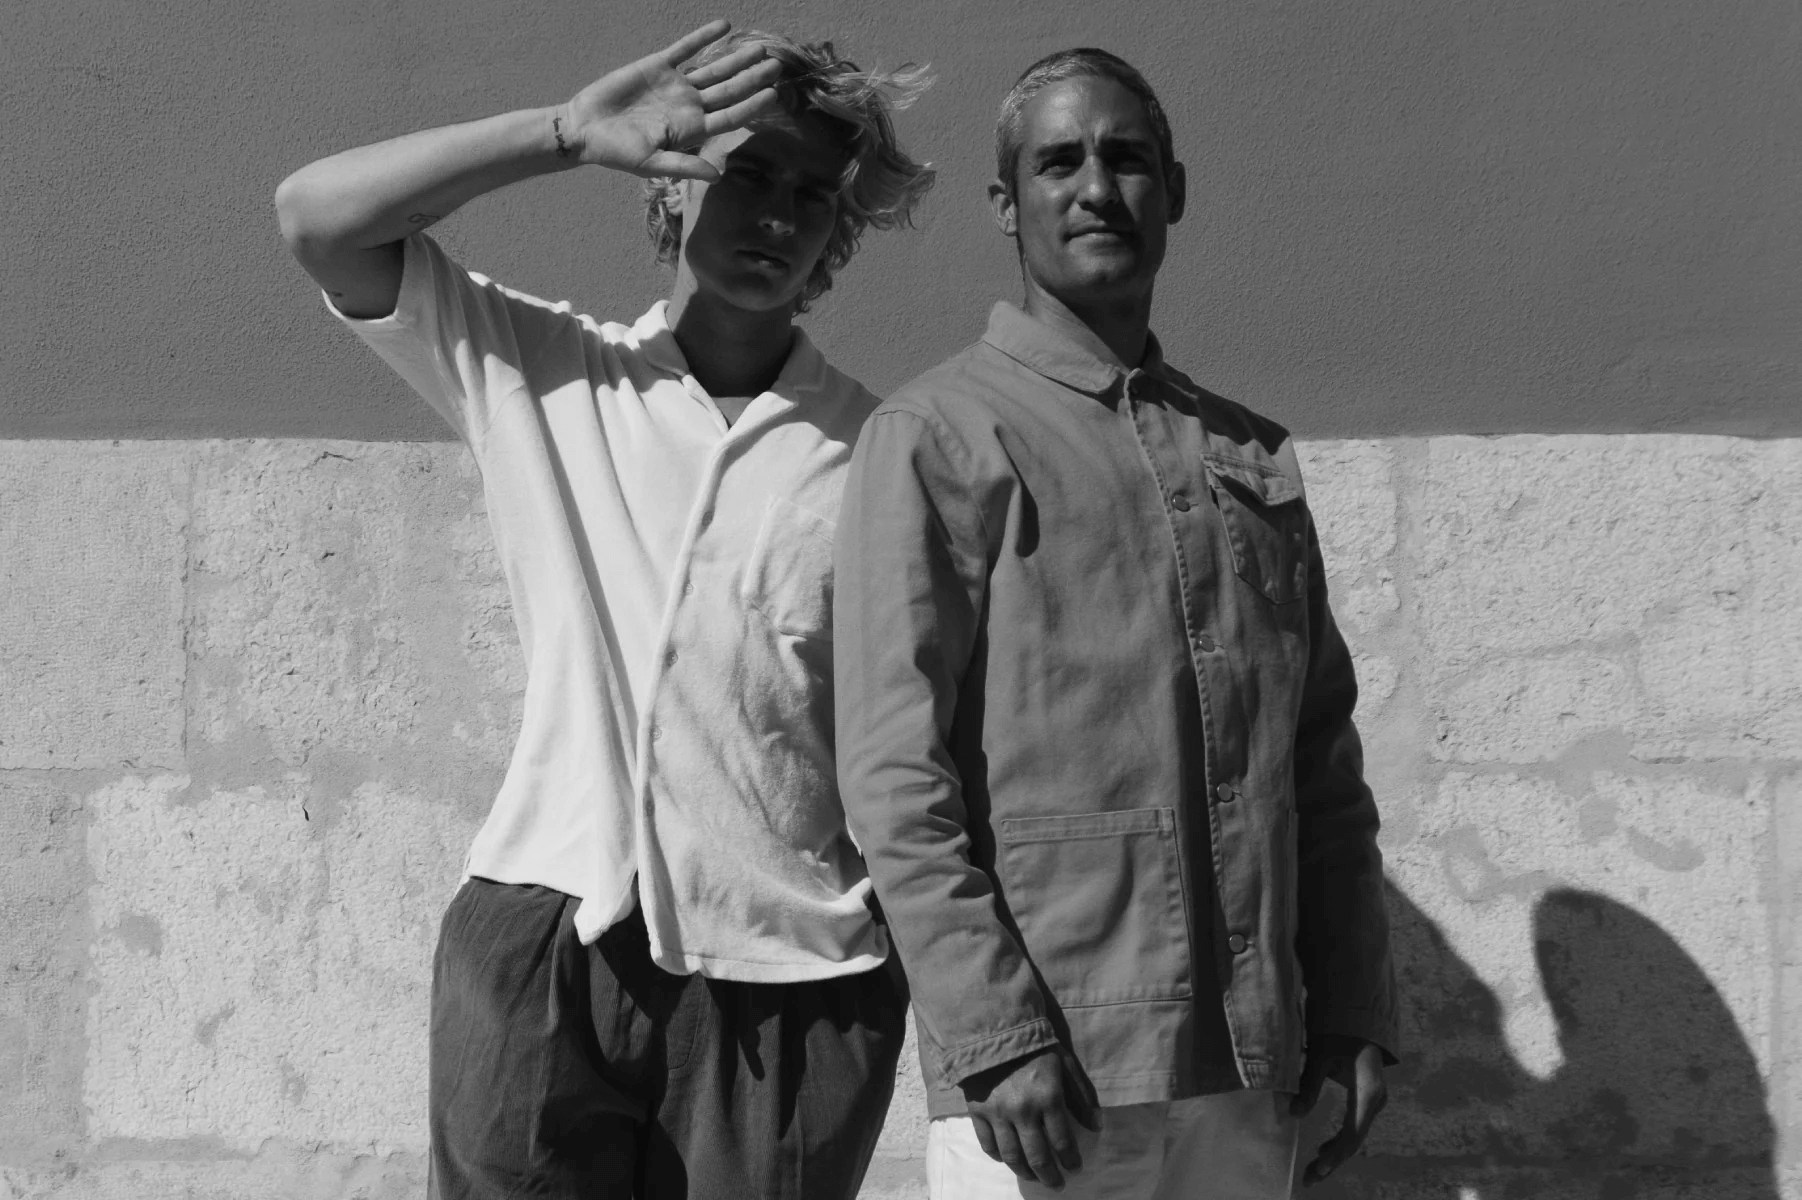 Redesign - Pedro and Yannick from Saline, the surfing experience Lisbon was longing for.